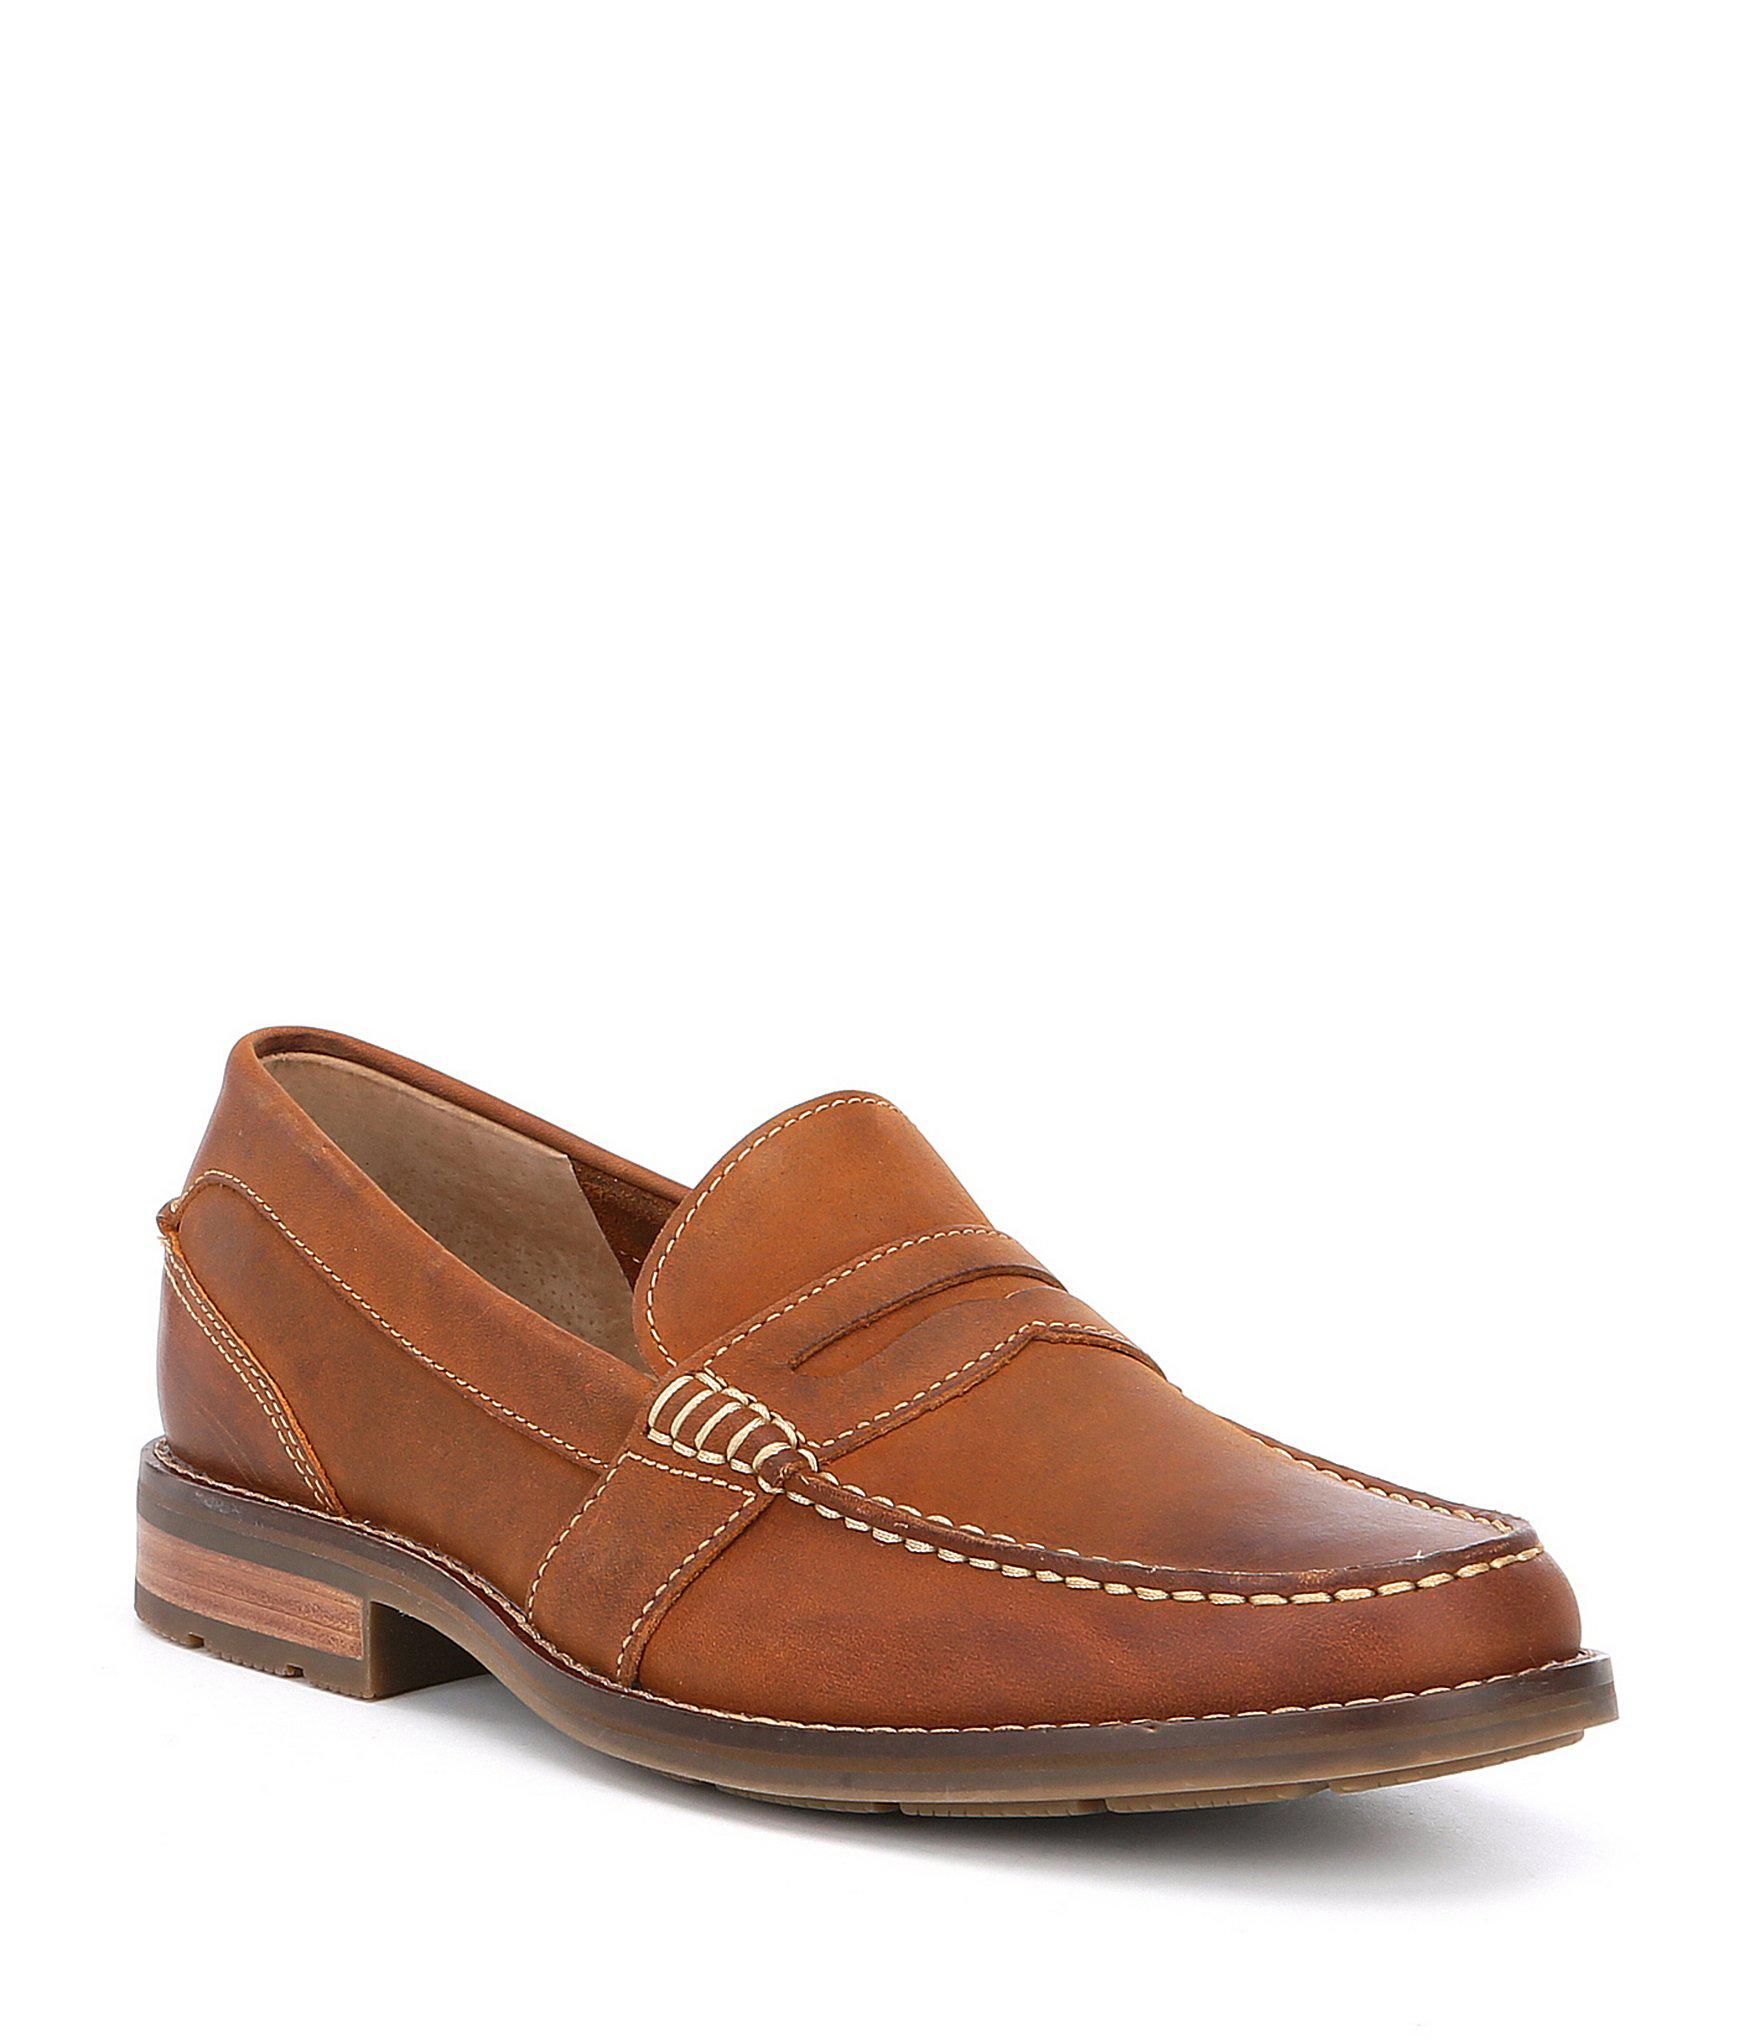 Sperry Top-Sider Men's Essex Penny Loafers in Tan (Brown) for Men - Lyst